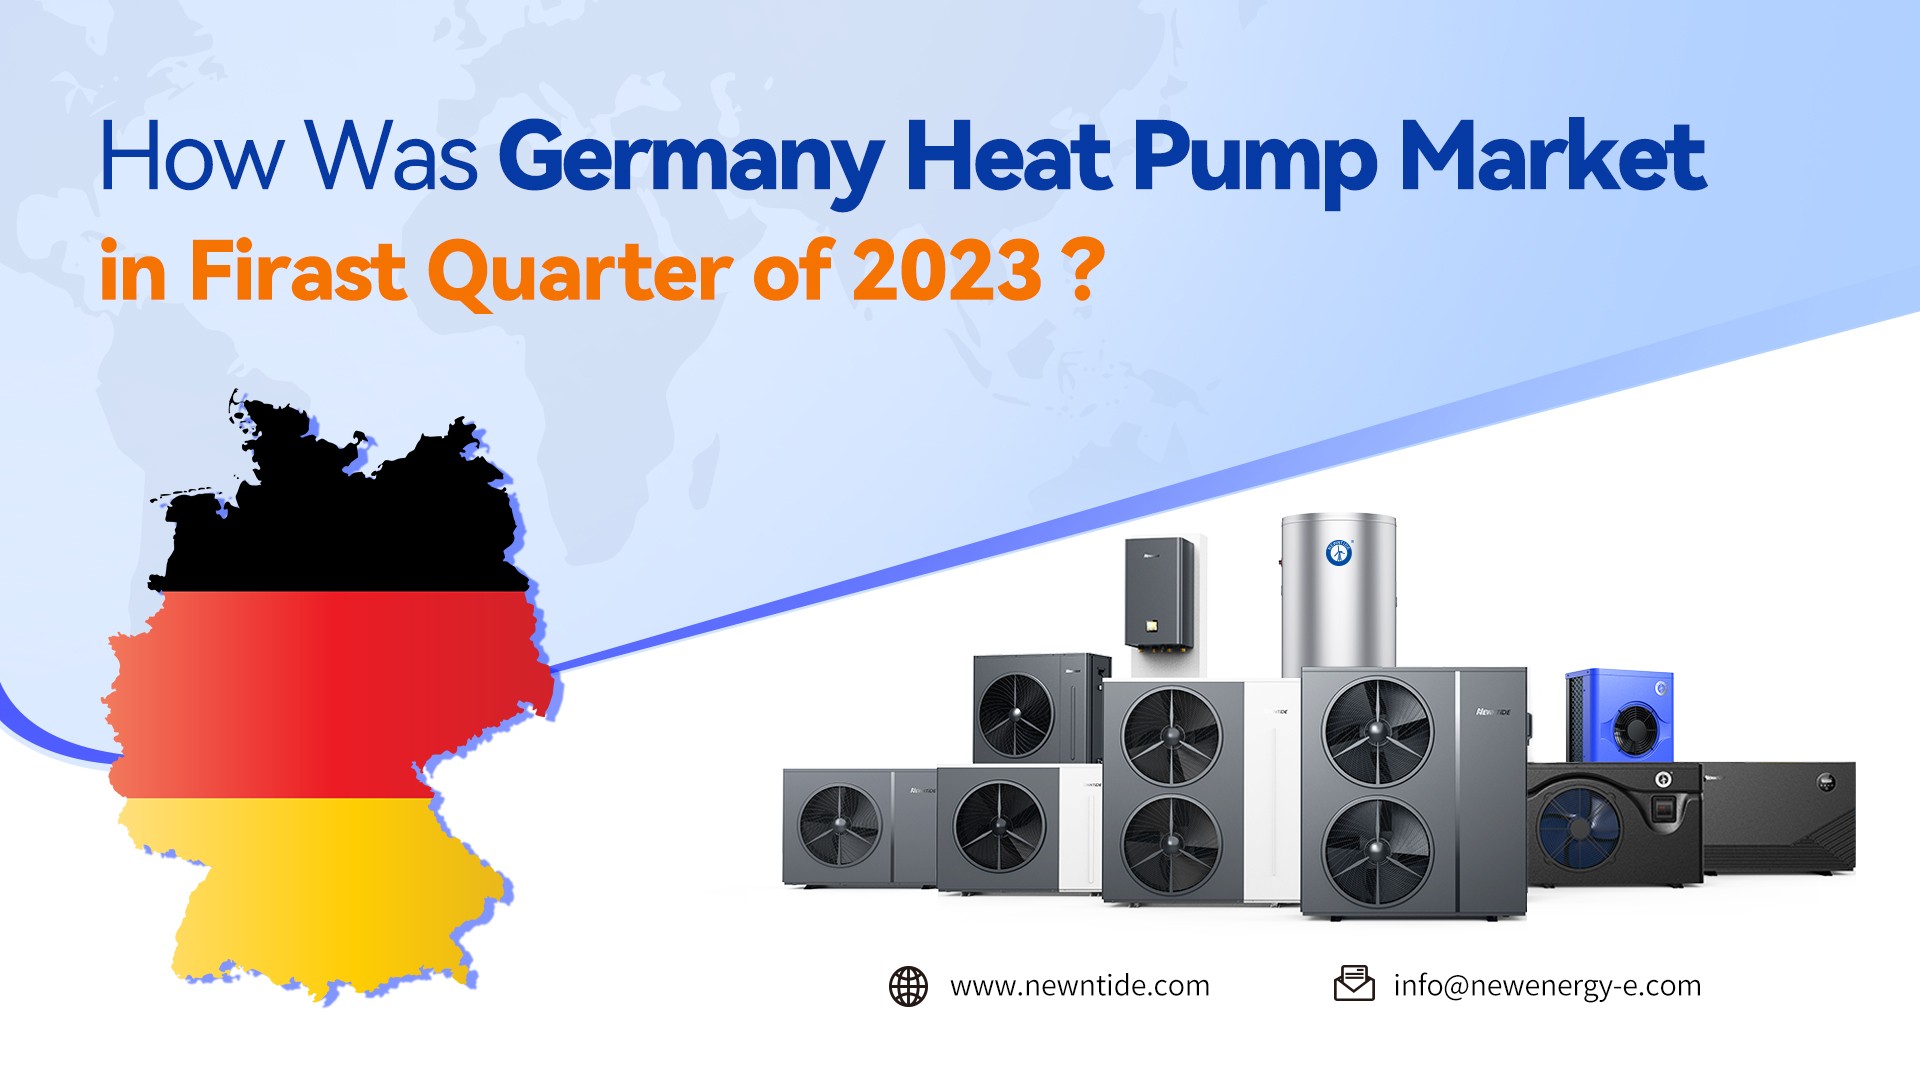 How Was Germany Heat Pump Market in First Quarter of 2023?